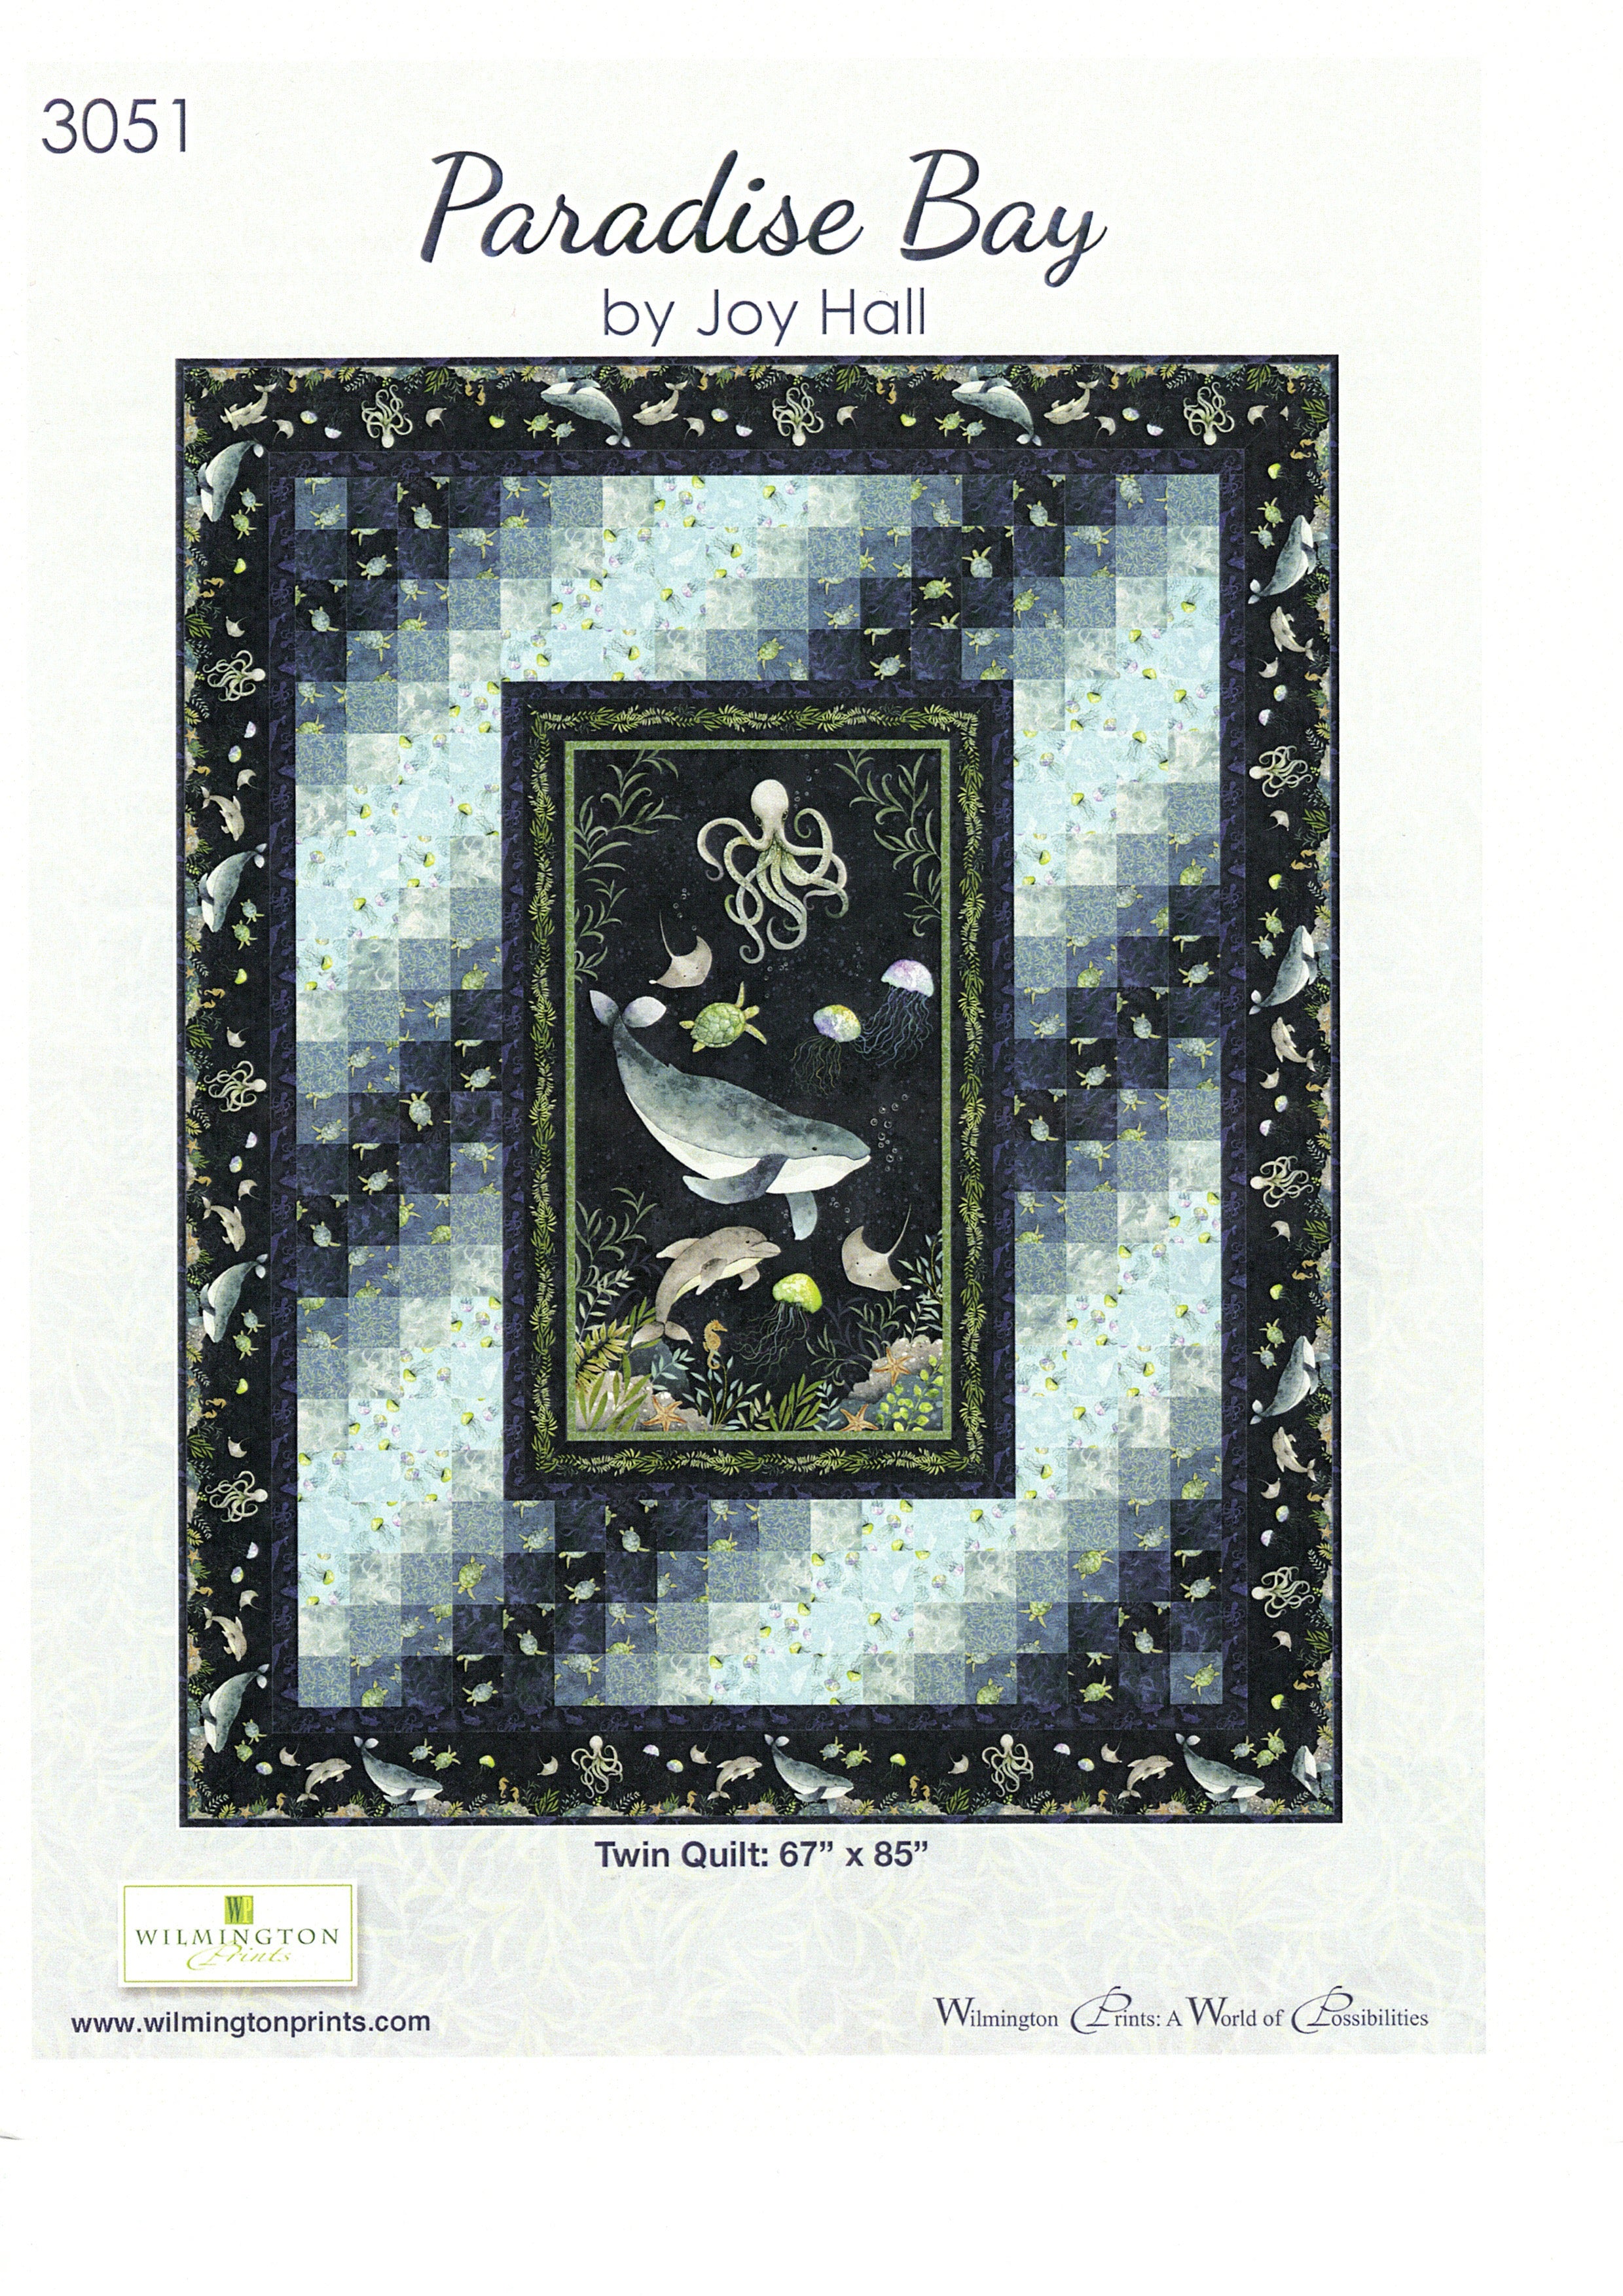 Paradise Bay Pattern - For Twin Quilt - 67" x 85" - 3051